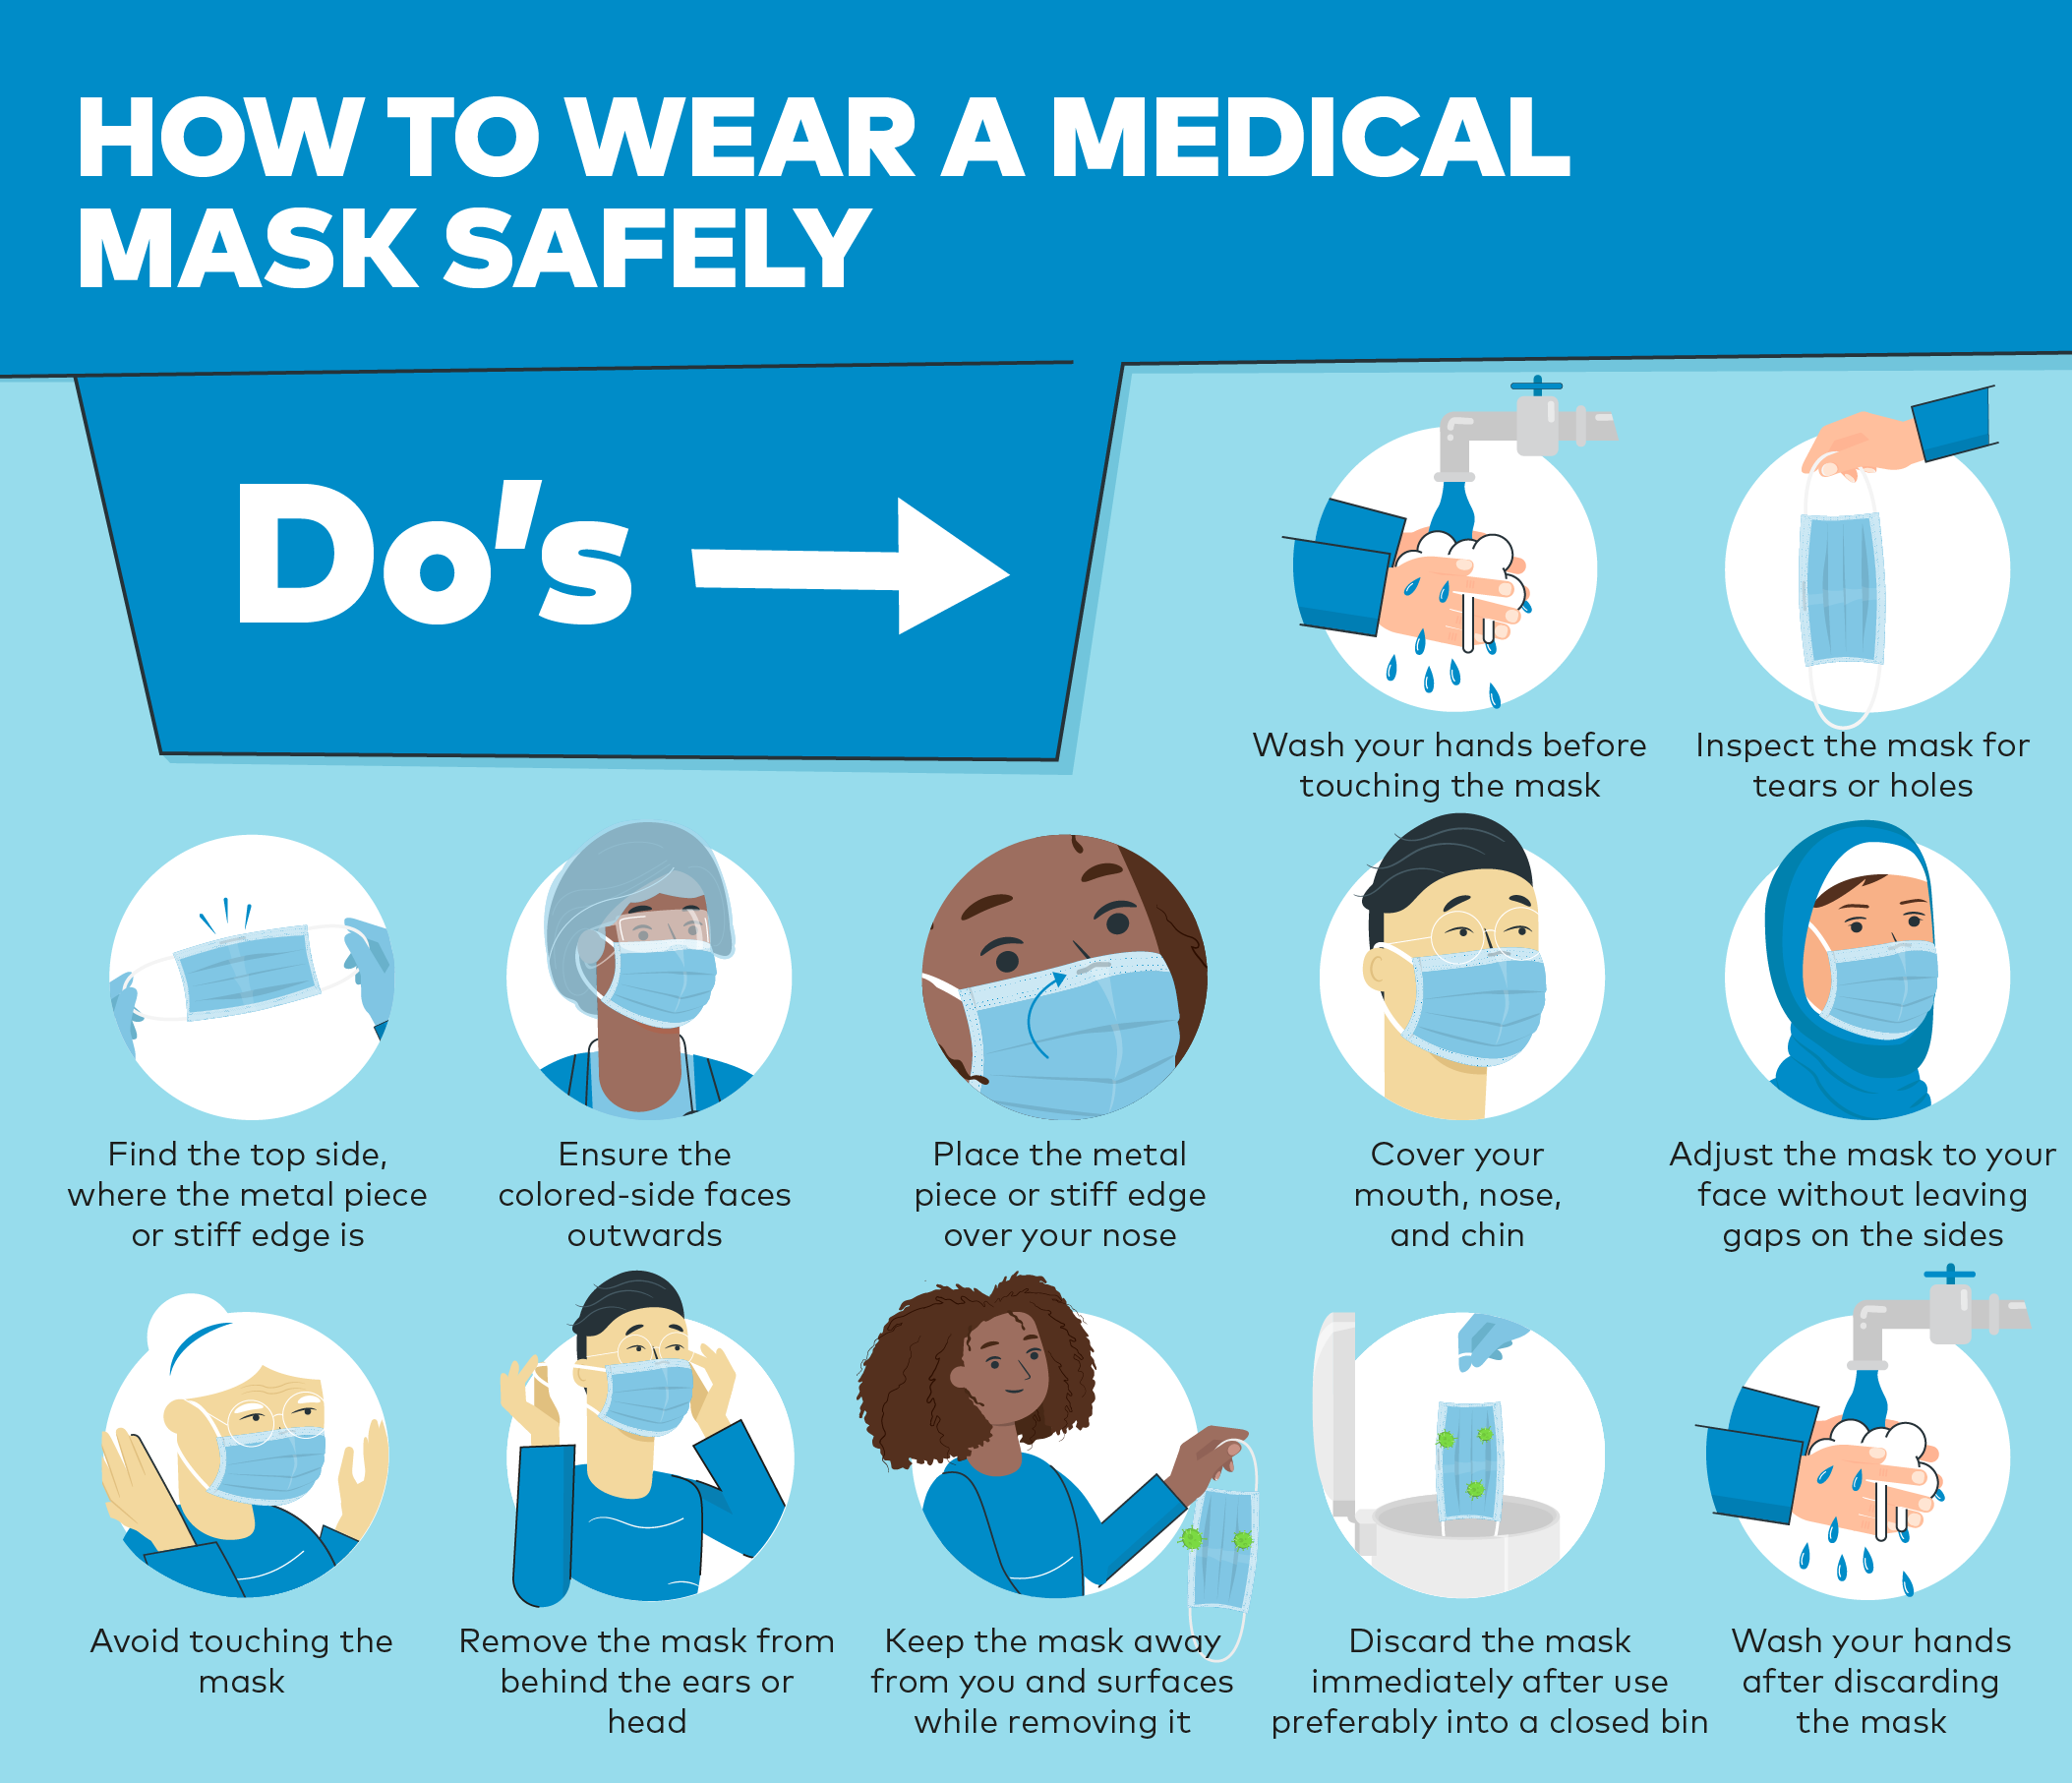 How to wear a medical mask safely